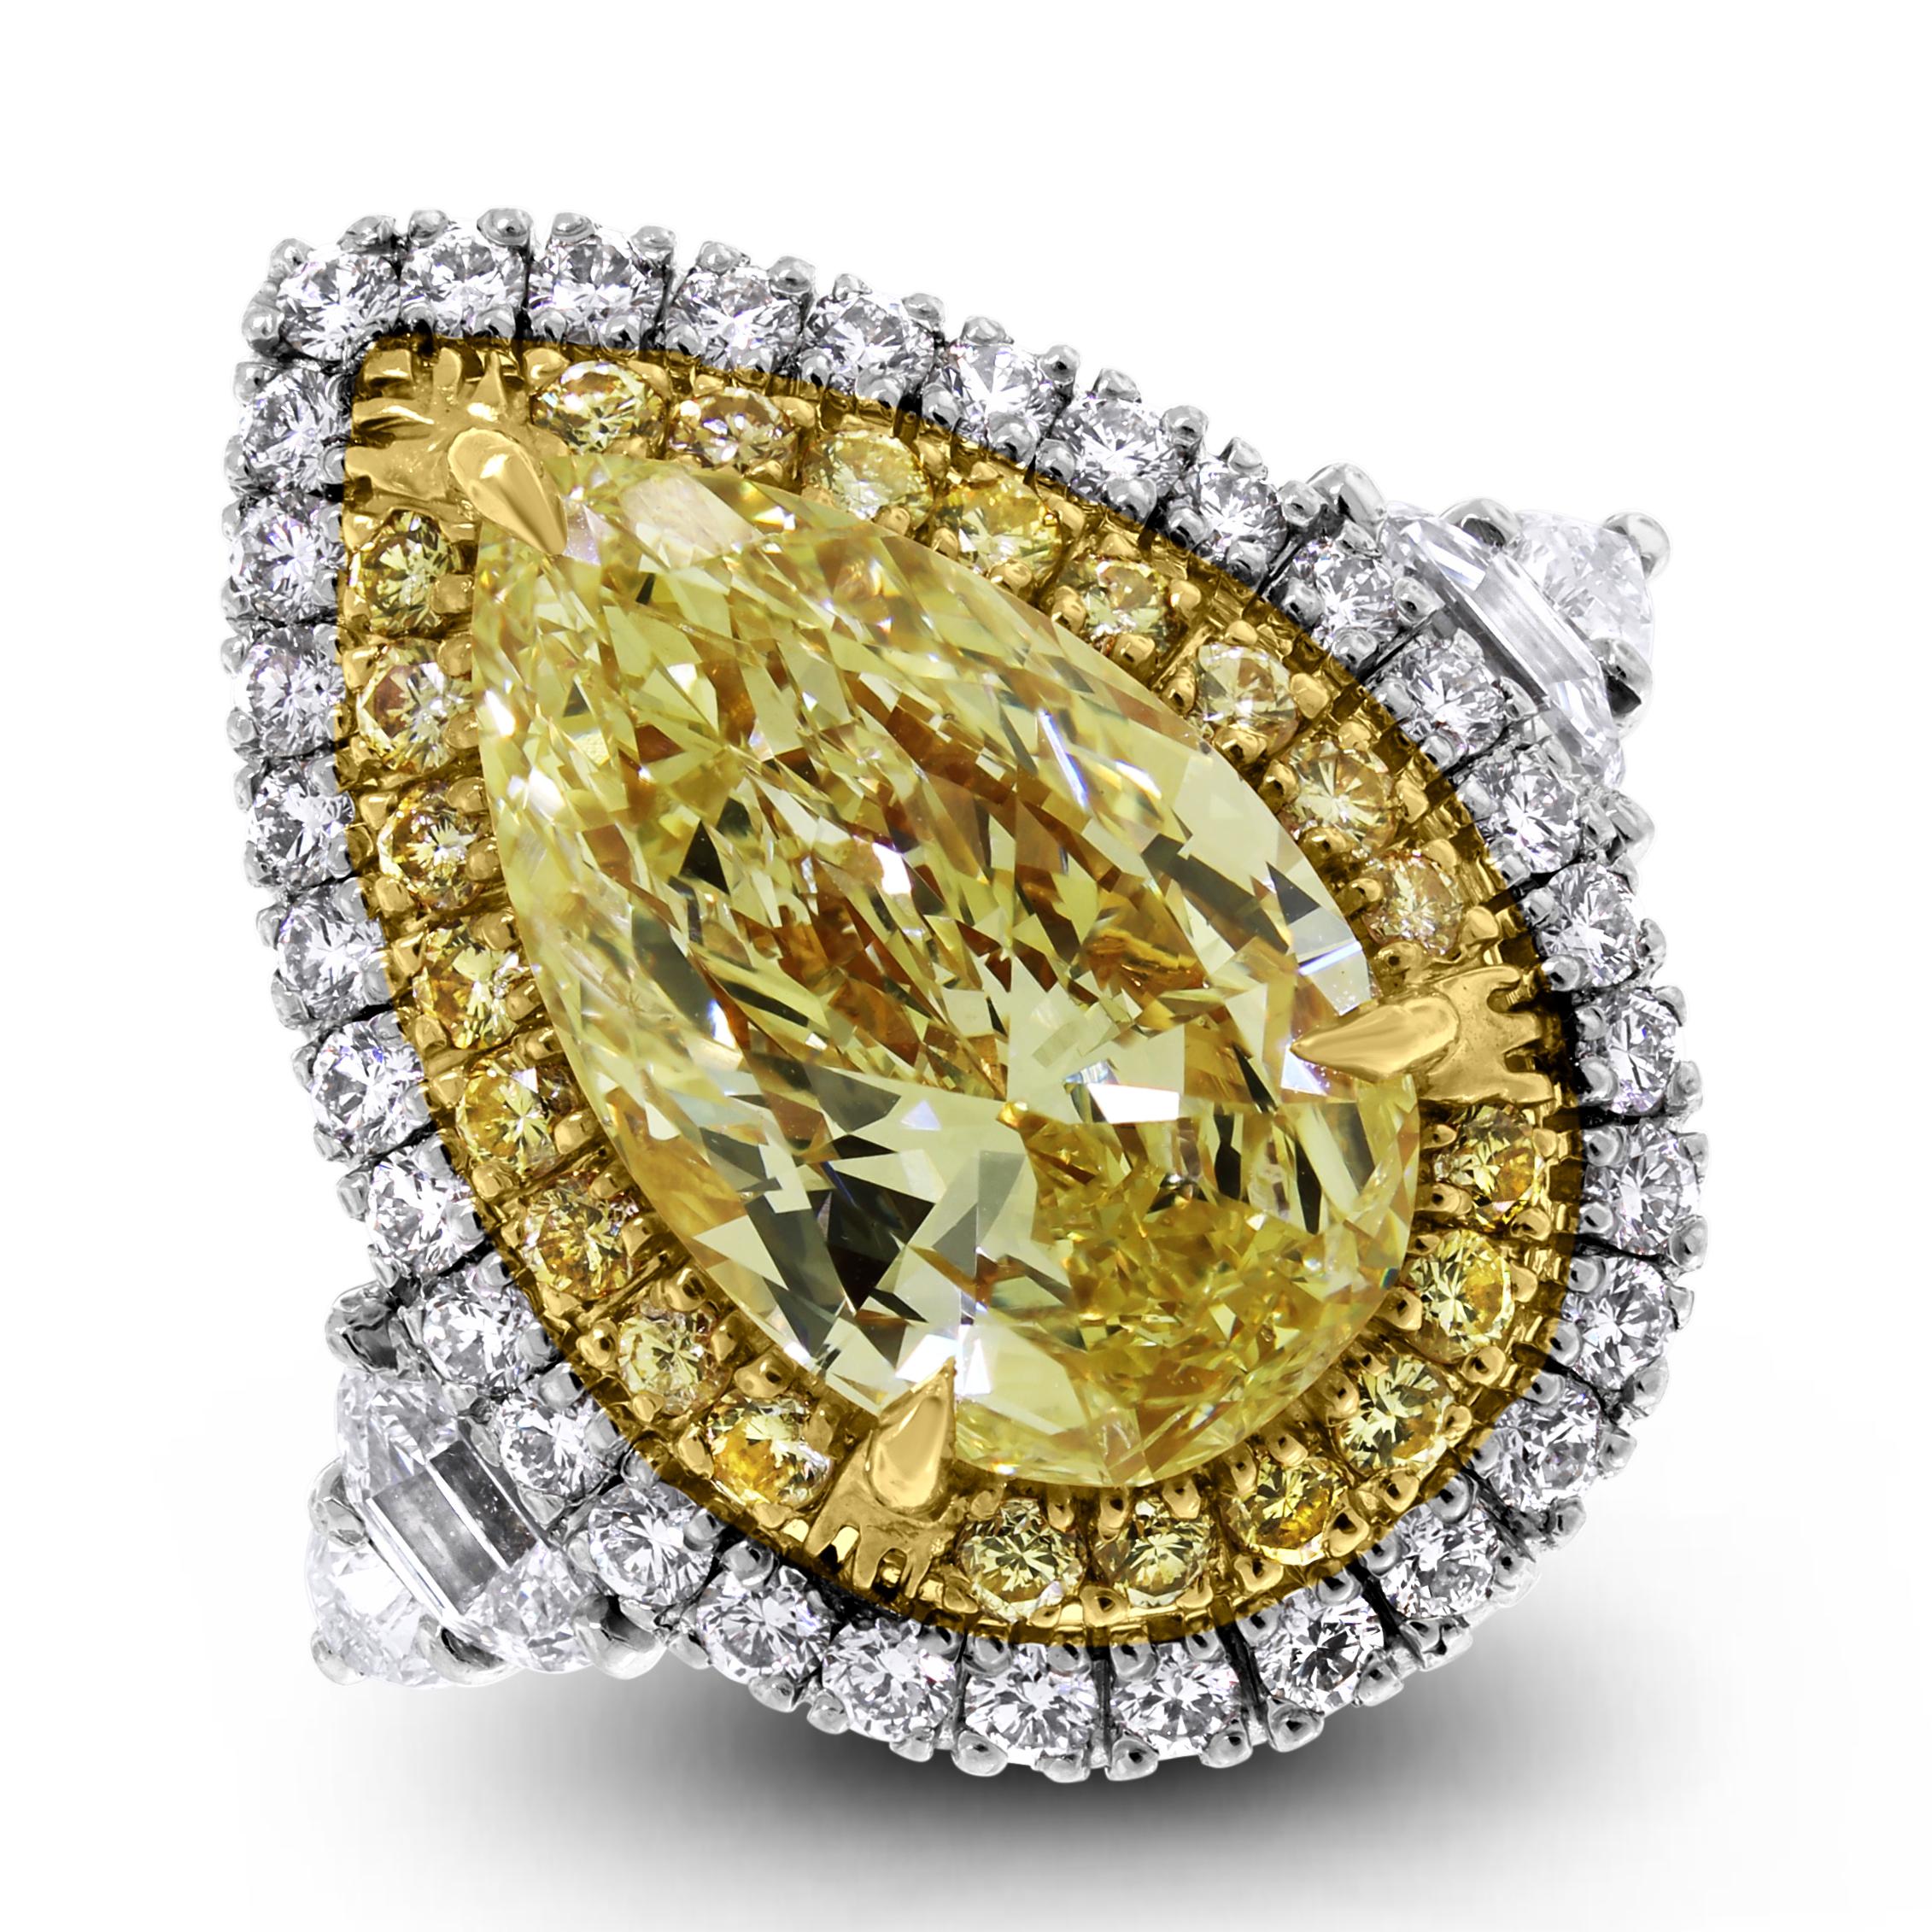 Big, bold and powerful, this statement yellow diamond ring is simply astounding.

Center Diamond Shape: Pear Shape
Center Diamond Weight: 8.85 ct 
Diamond Color: Fancy Yellow
Certificate: GIA 15678593

Side Diamonds Shapes: Round, Half Moon &